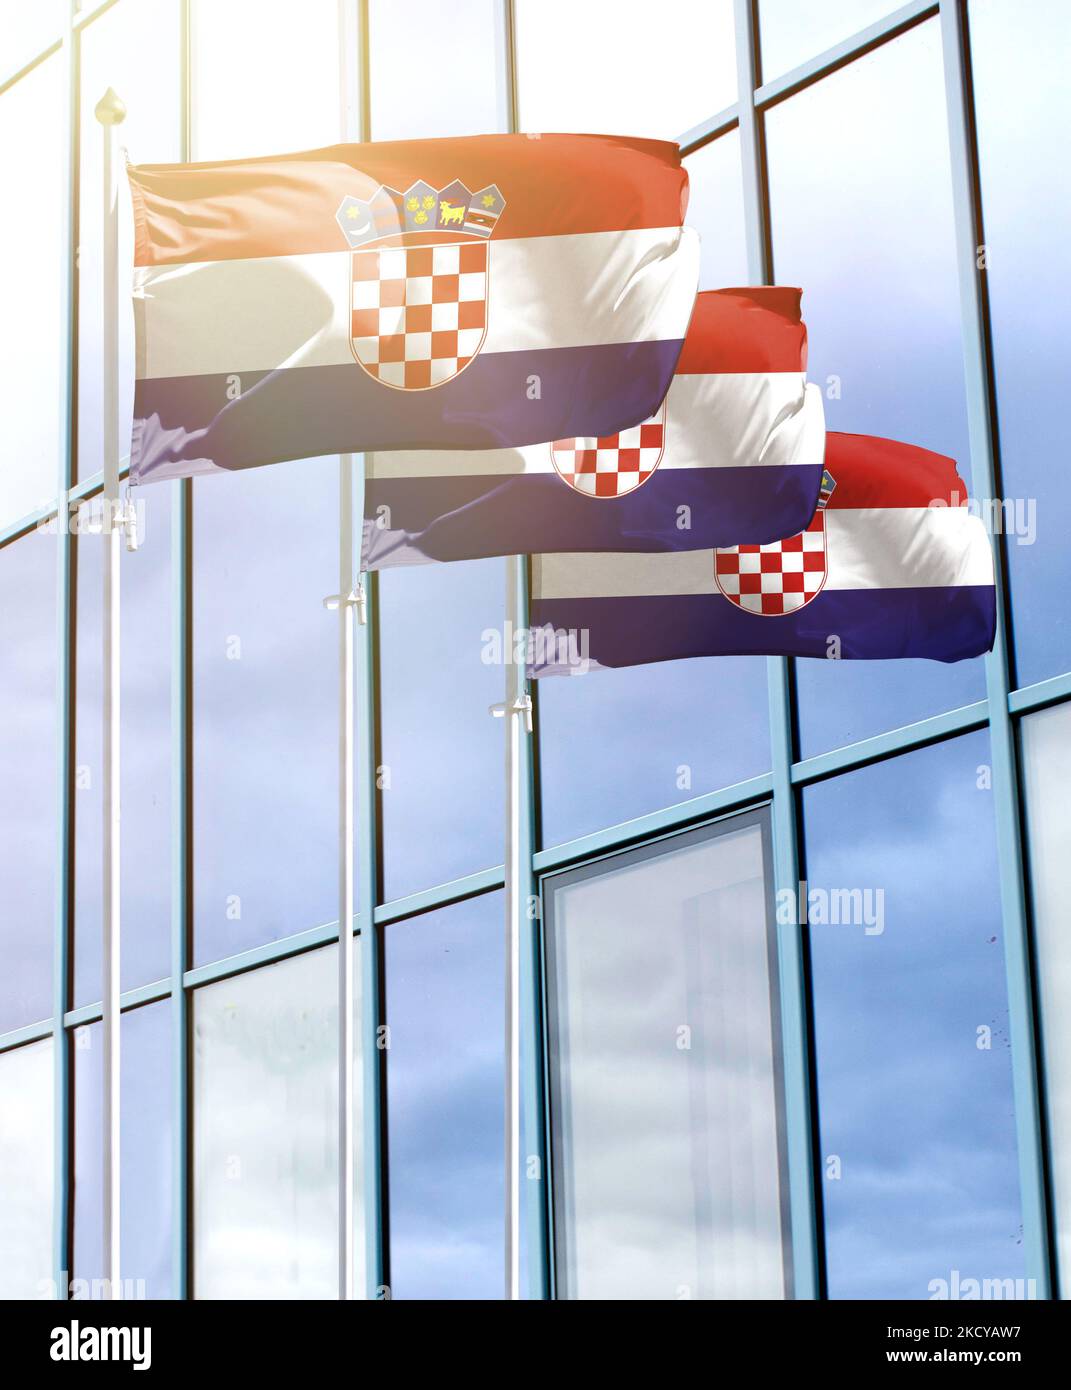 Flagpoles with the flag of Croatia in front of the business center Stock Photo